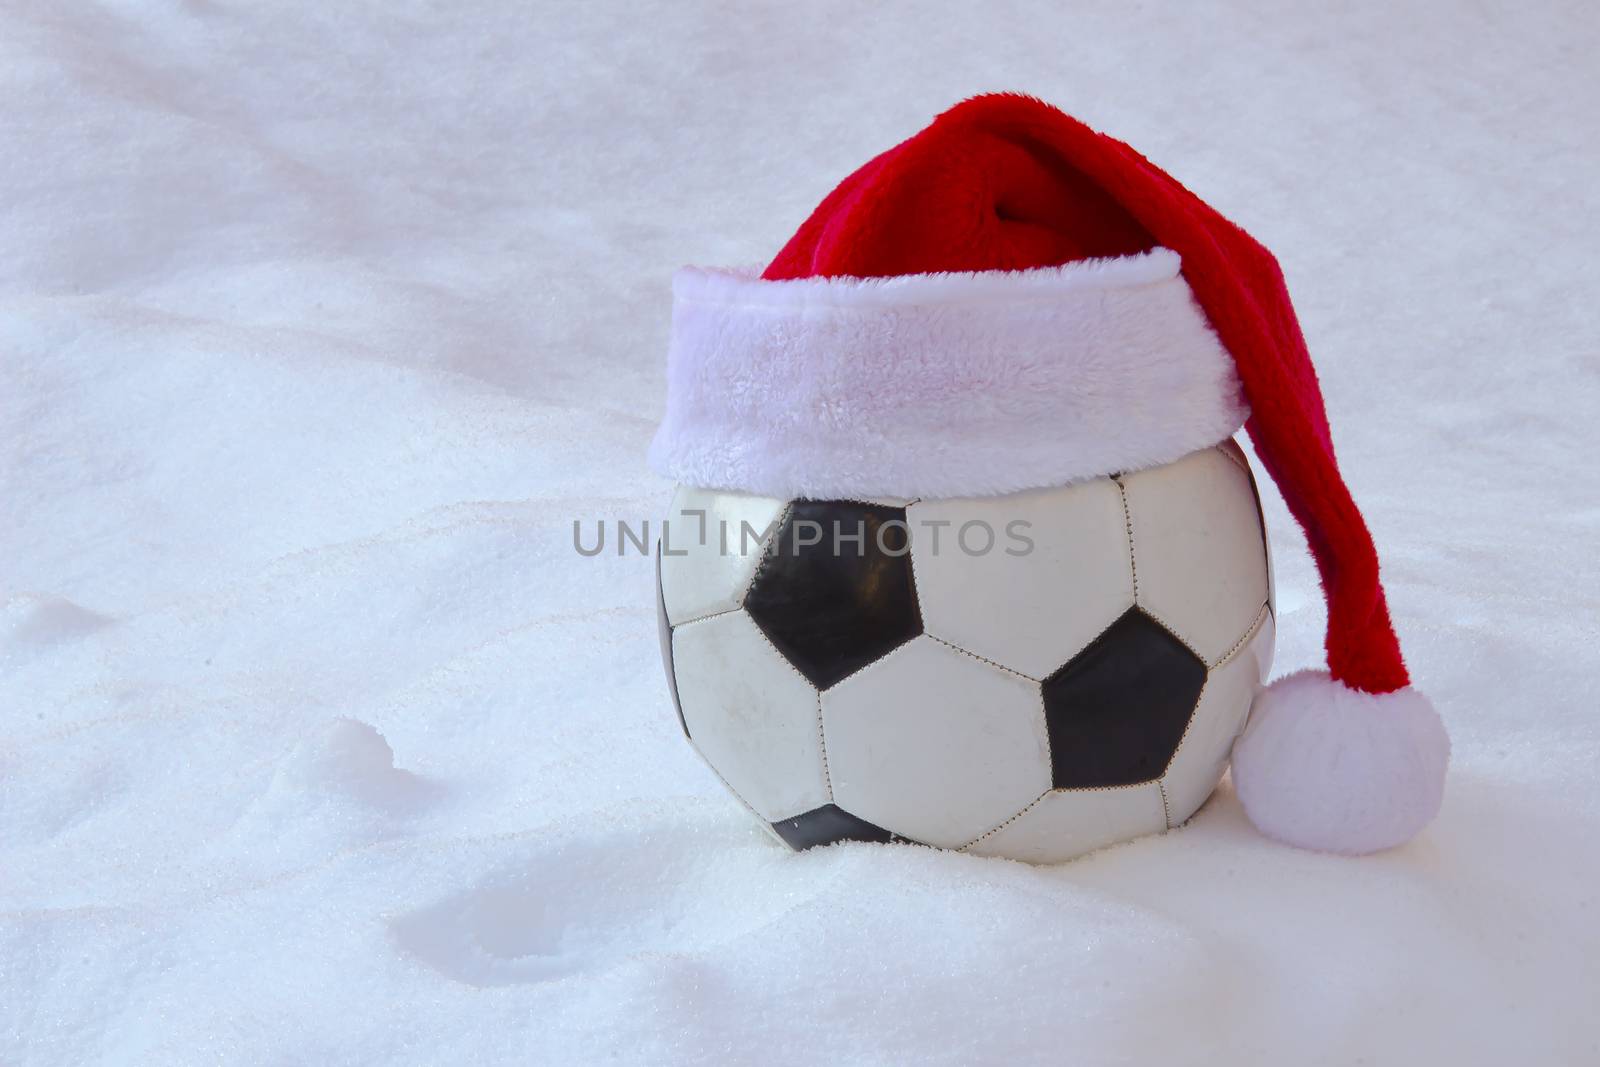 Soccer ball with a Santa hat on snow for Christmas by oasisamuel